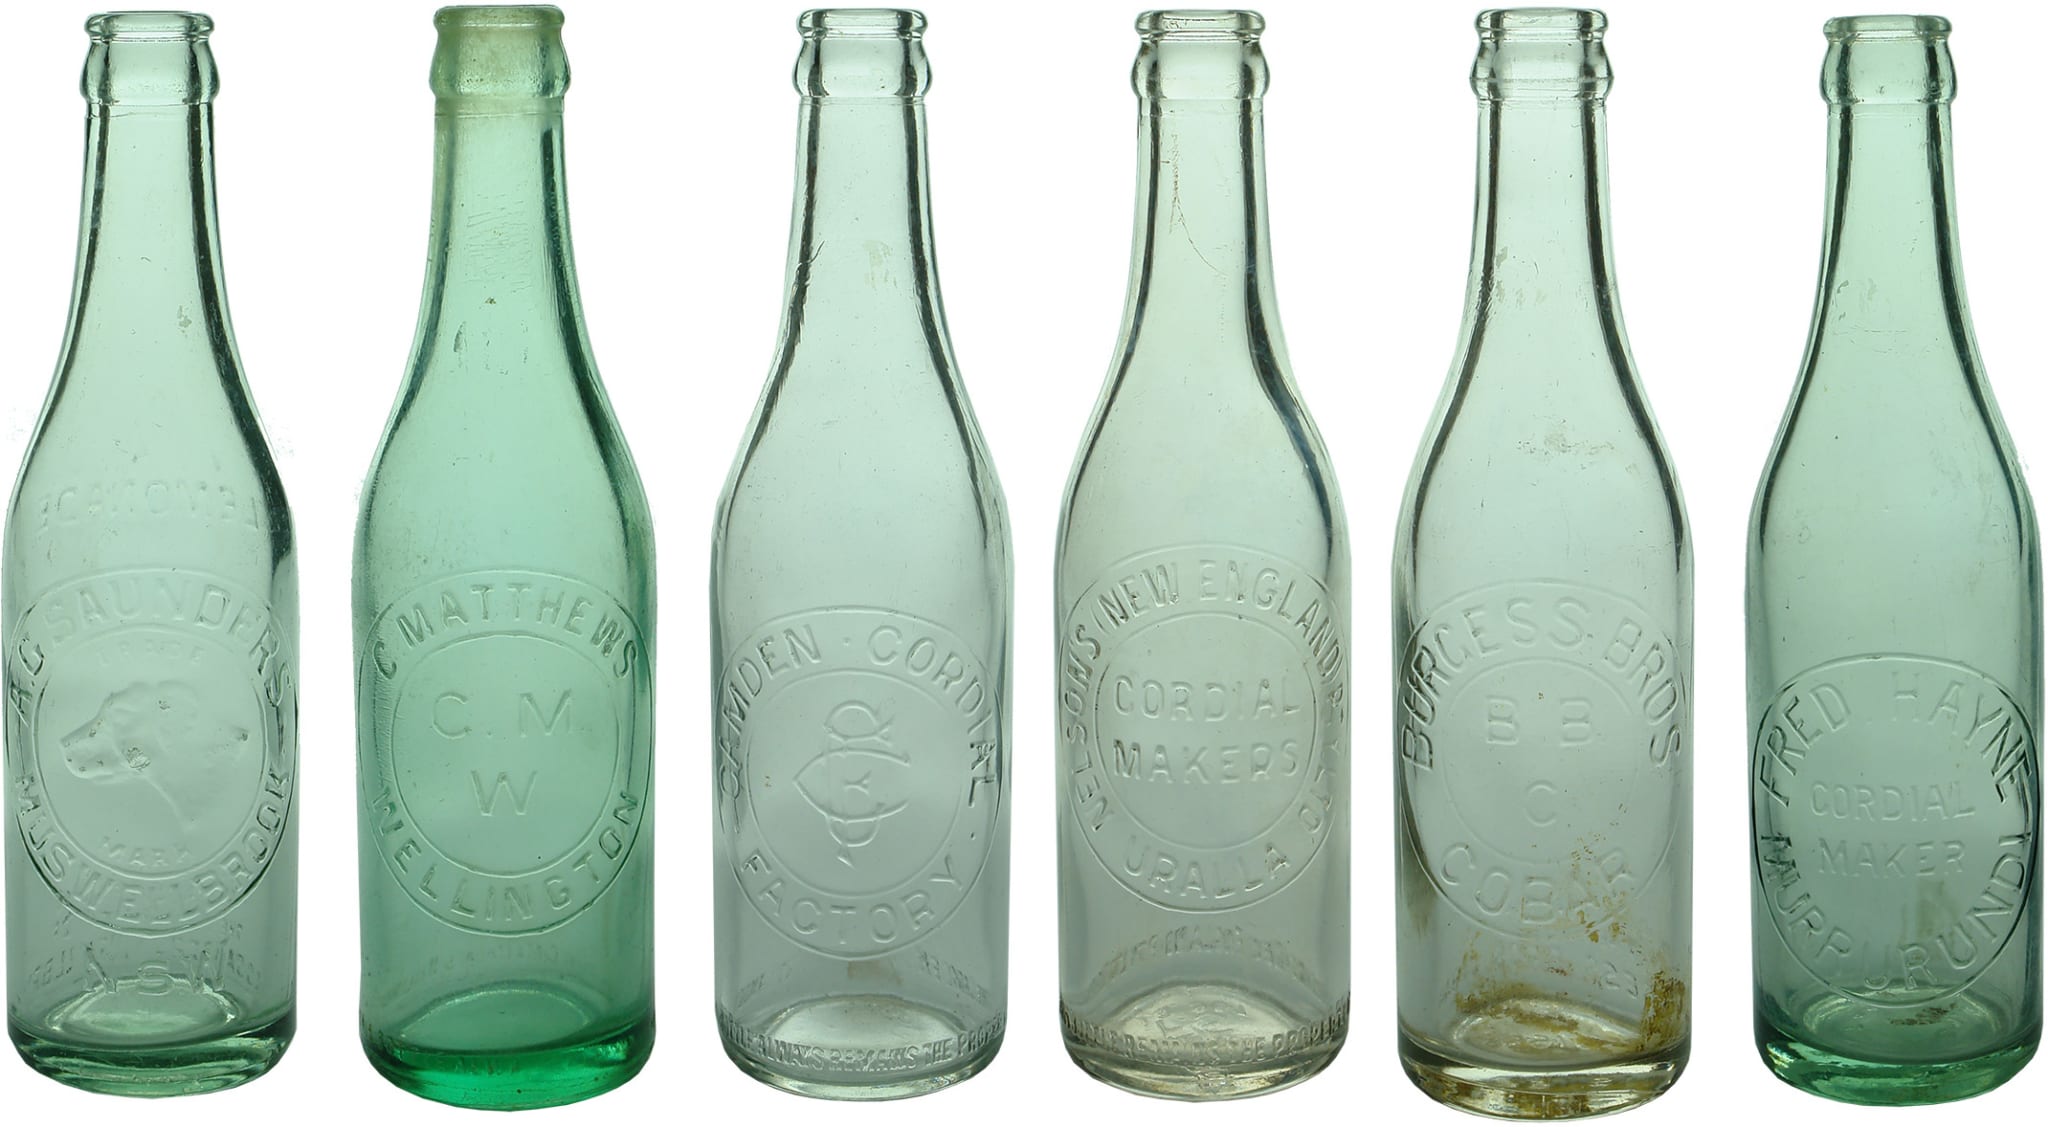 New South Wales Crown Seal Soft Drink Bottles